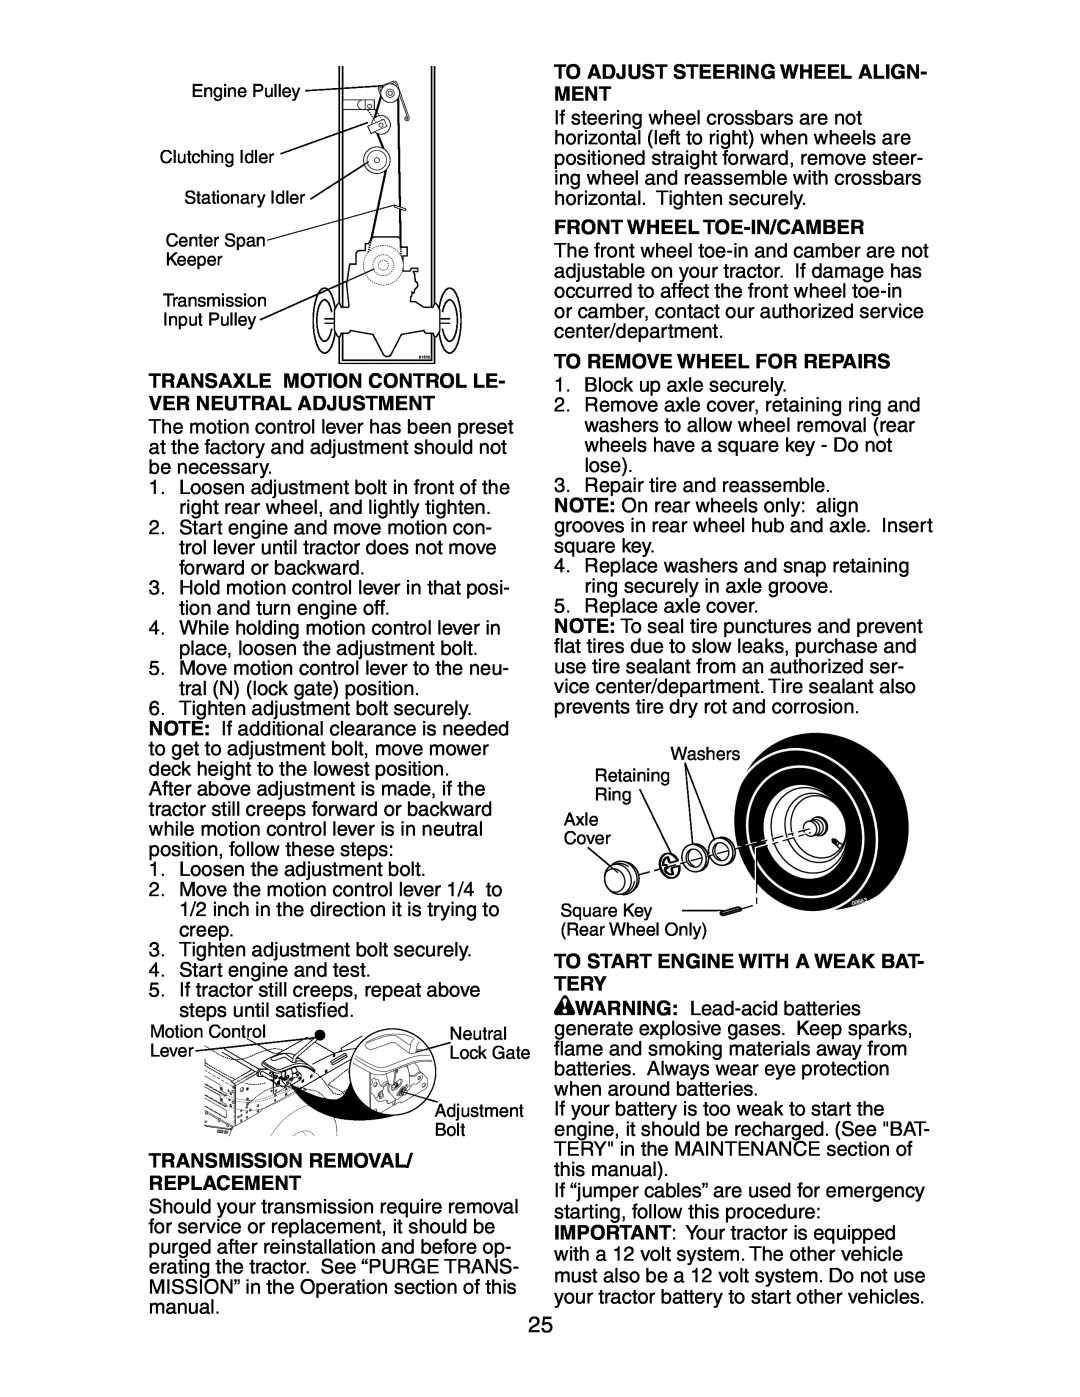 Poulan 191663 manual Transaxle Motion Control Le- Ver Neutral Adjustment, To Adjust Steering Wheel Align- Ment 